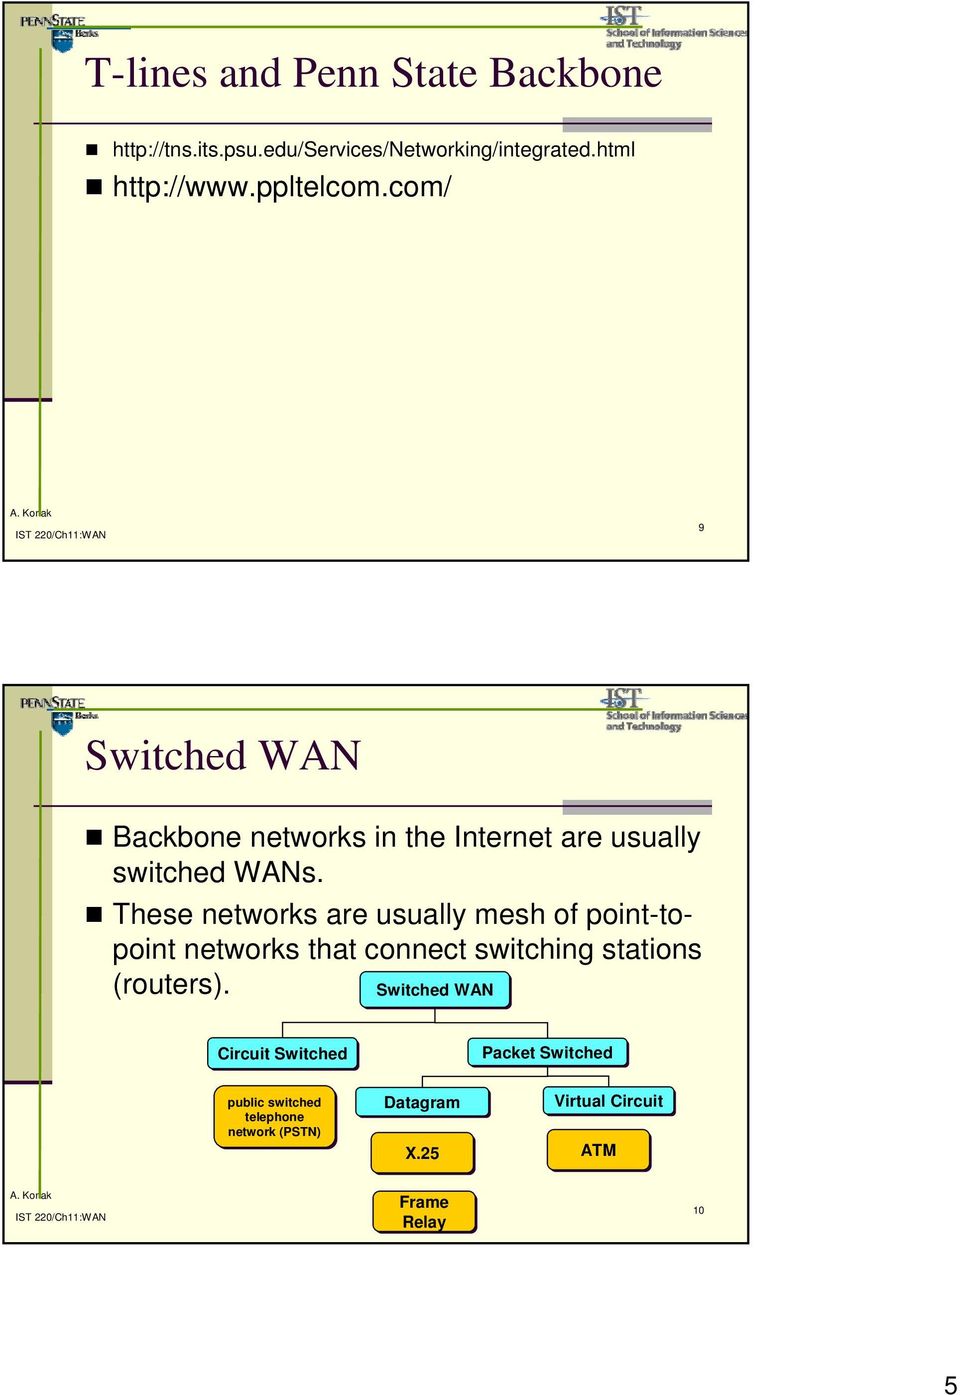 These networks are usually mesh of point-topoint networks that connect switching stations (routers).